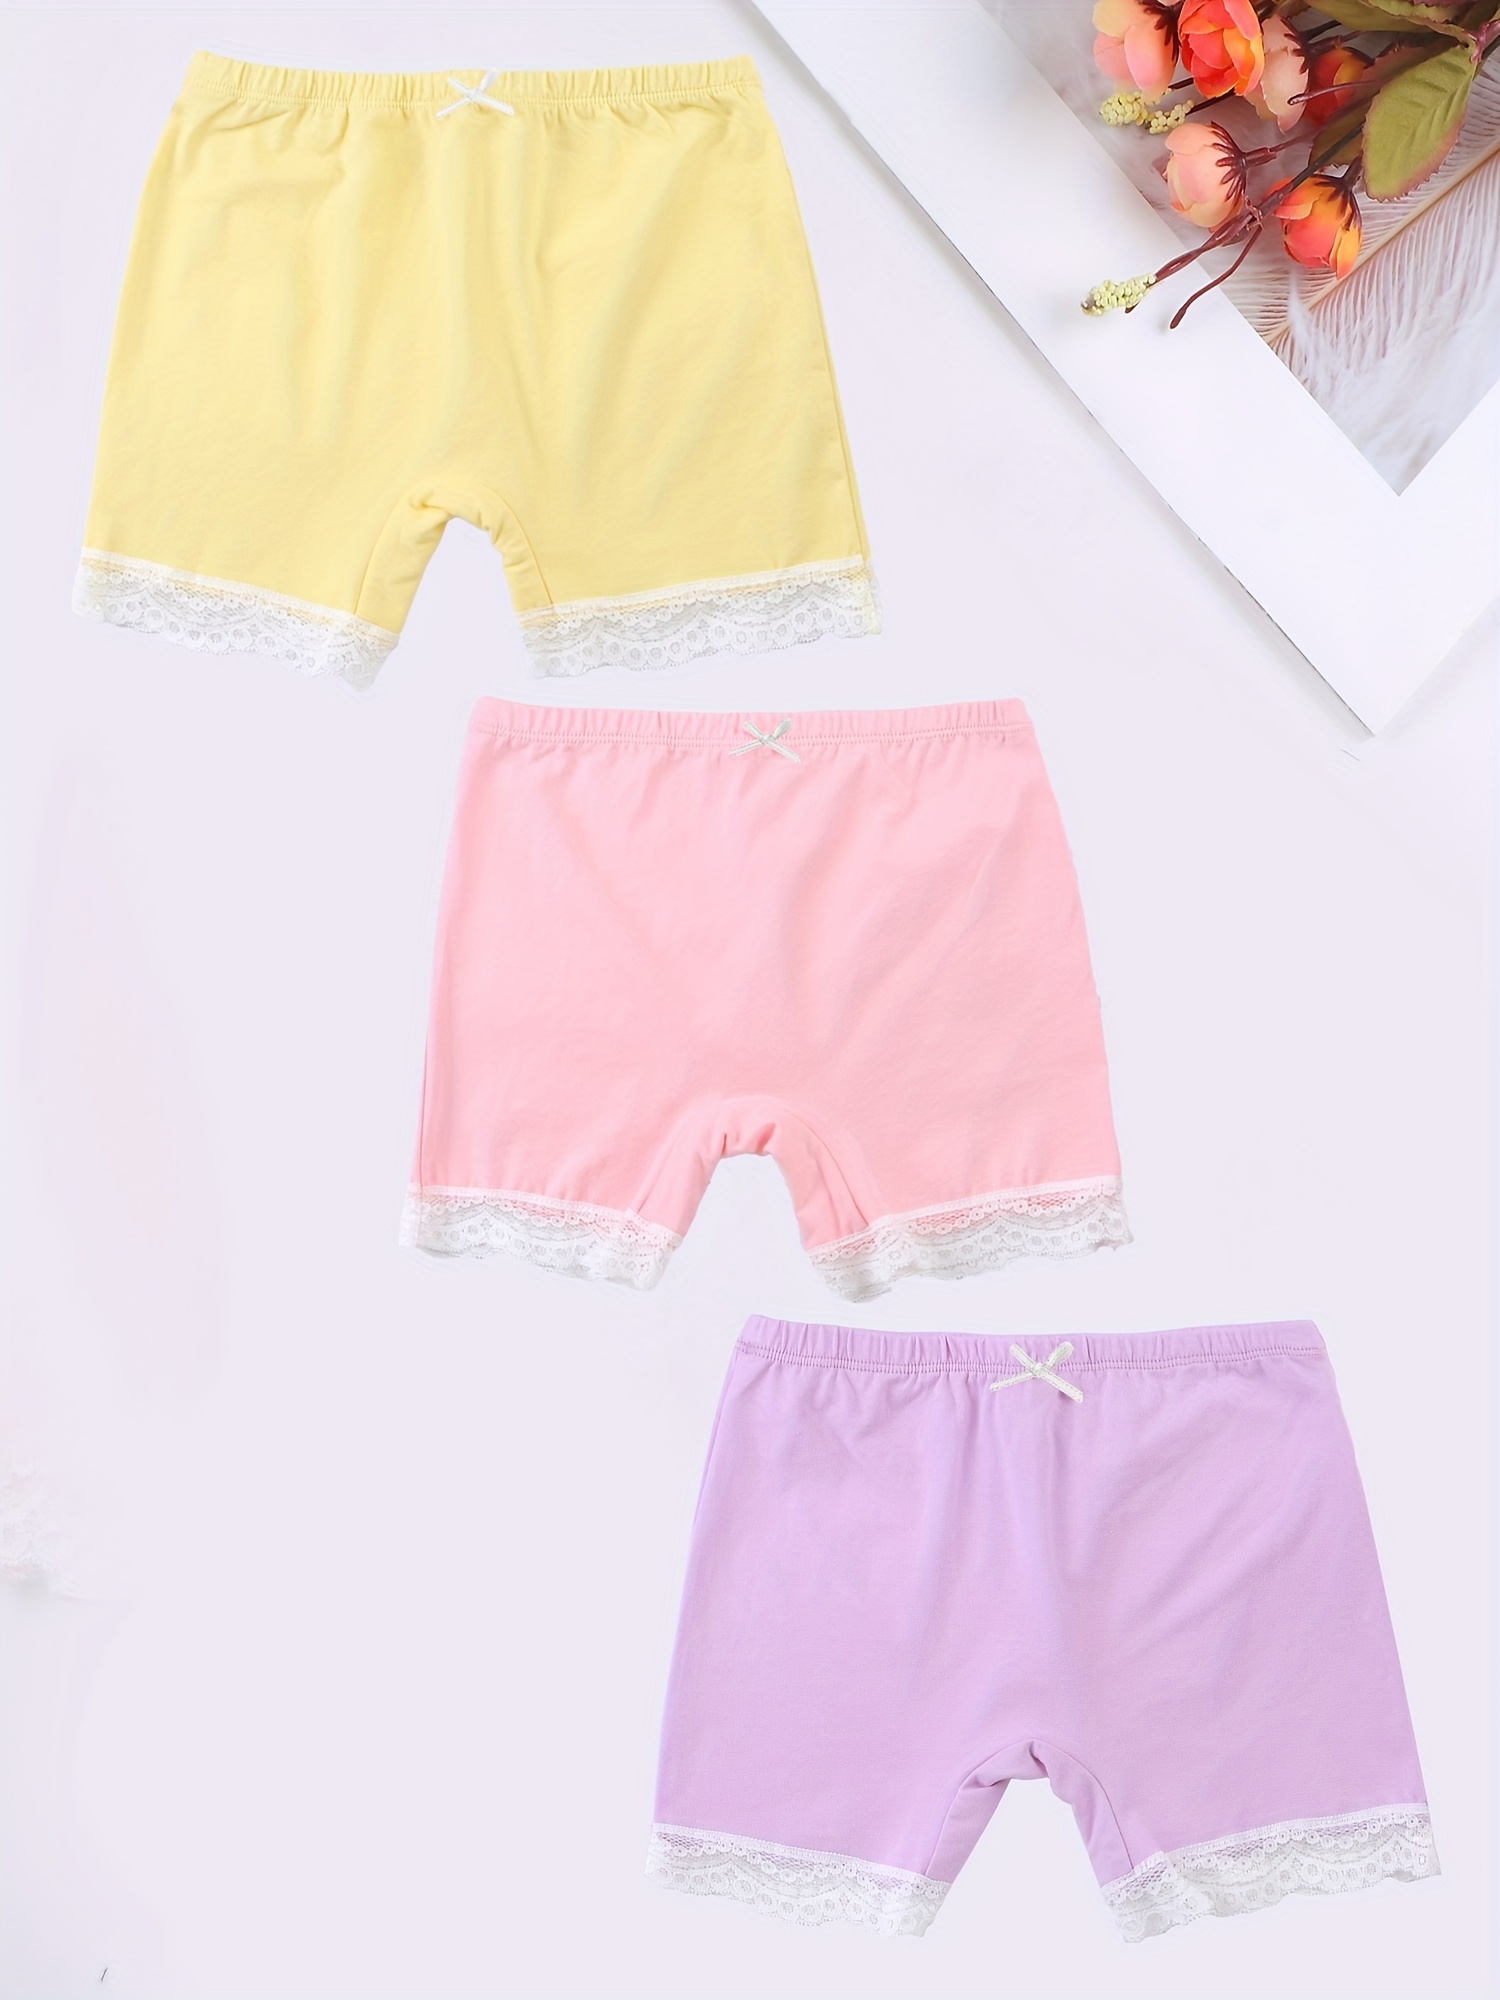 Summer Cotton Shorts for Girls, Lace Short Leggings, Safety Pants, Baby  Short Tights, B23